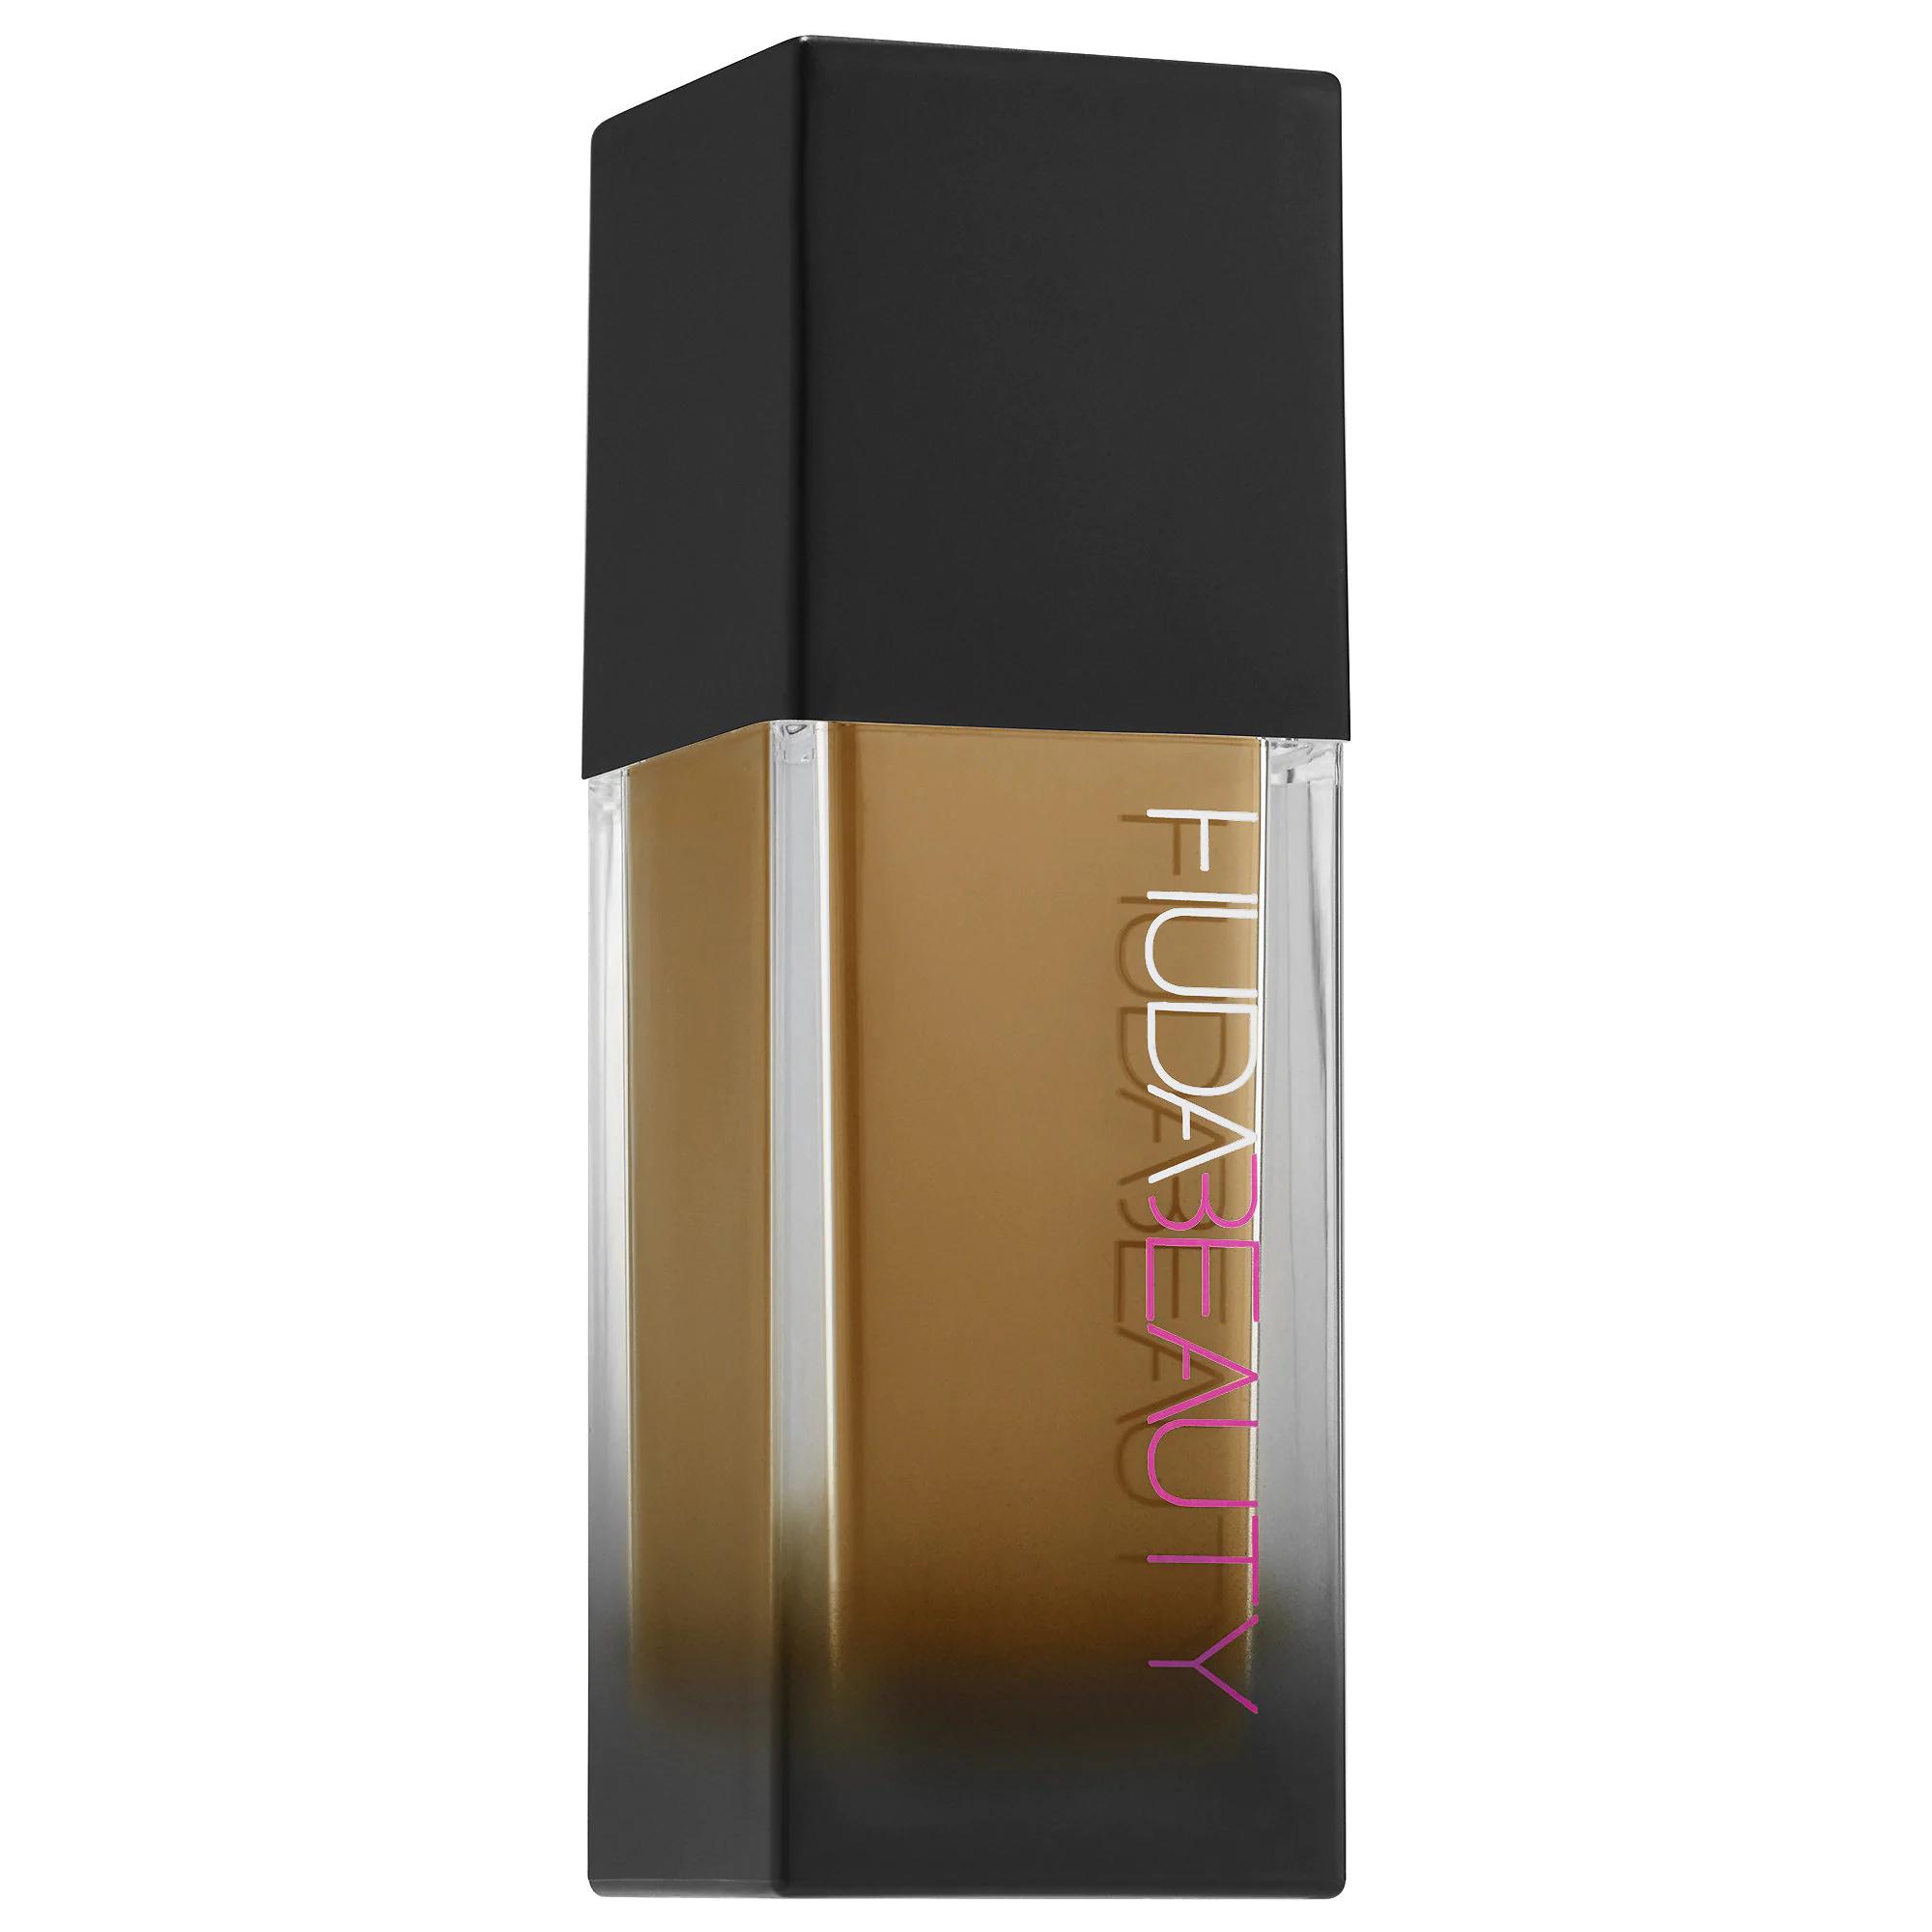 Huda Beauty #FauxFilter Foundation Toffee 420G